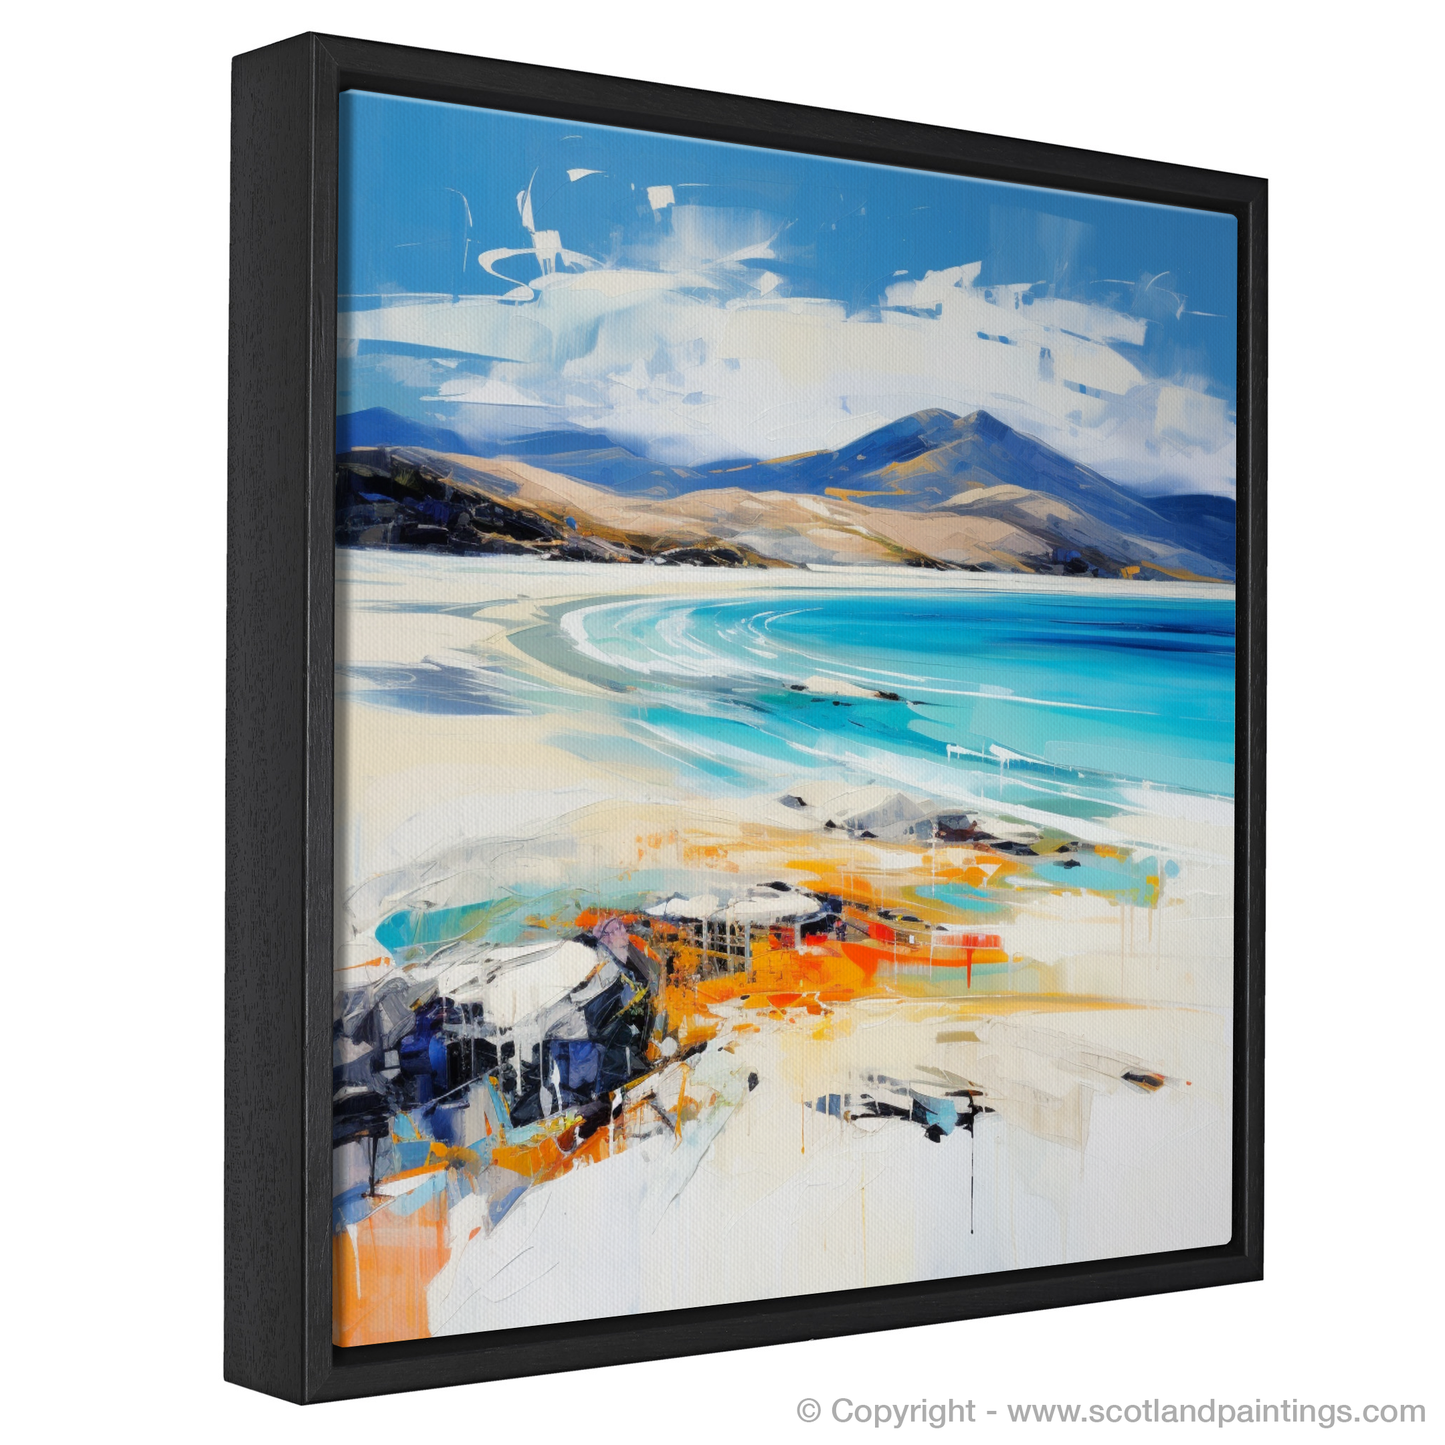 Painting and Art Print of Luskentyre Beach, Isle of Harris entitled "Luskentyre Beach: An Expressionist Ode to Scotland's Seascape".